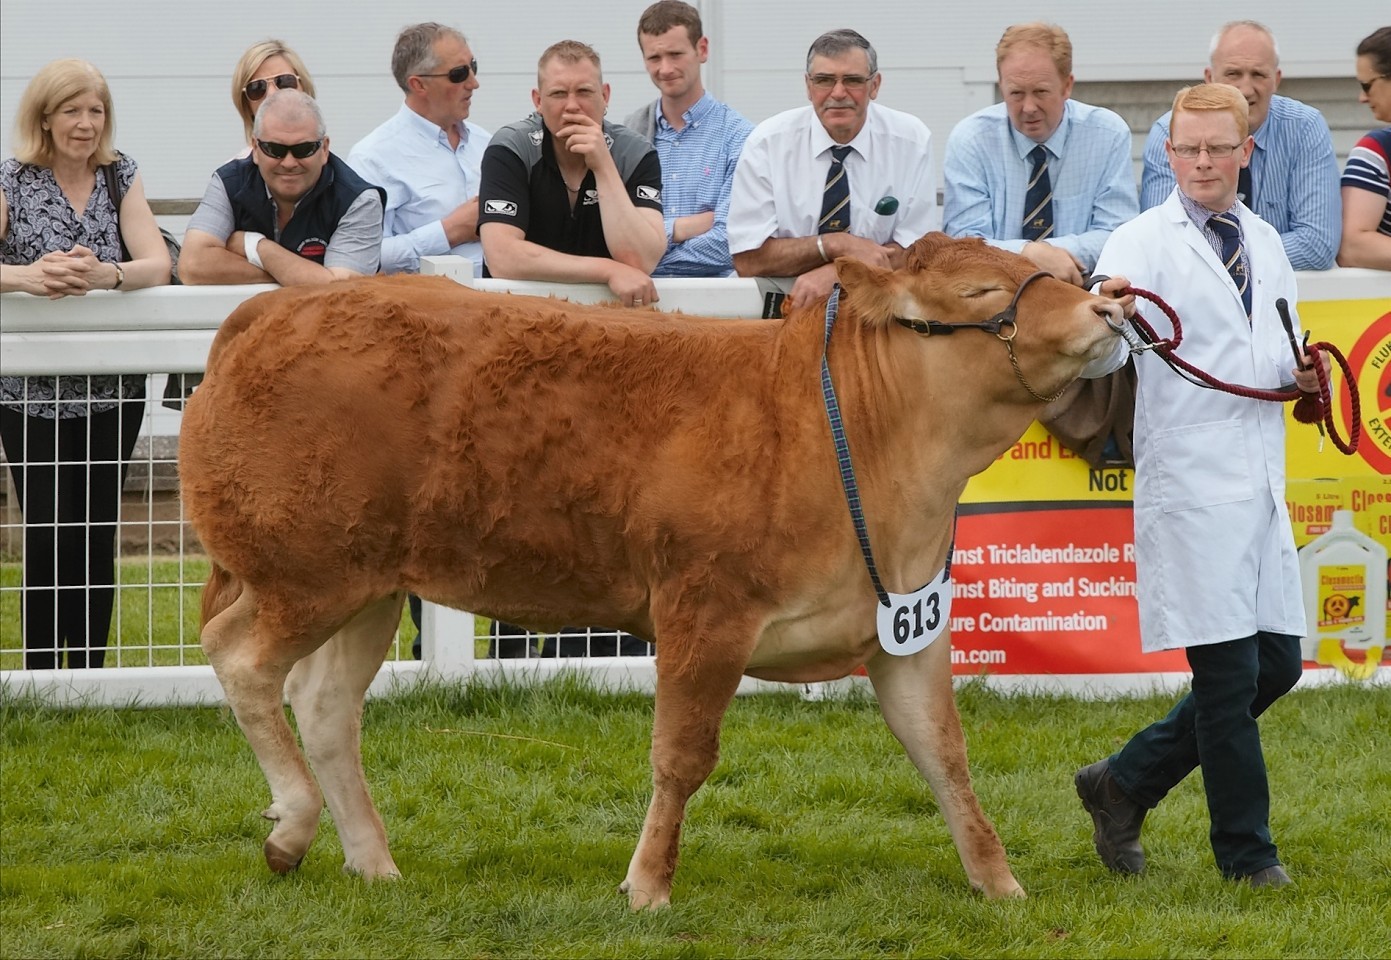 Keen interest in the Limousin judging at the Royal Highland Show today